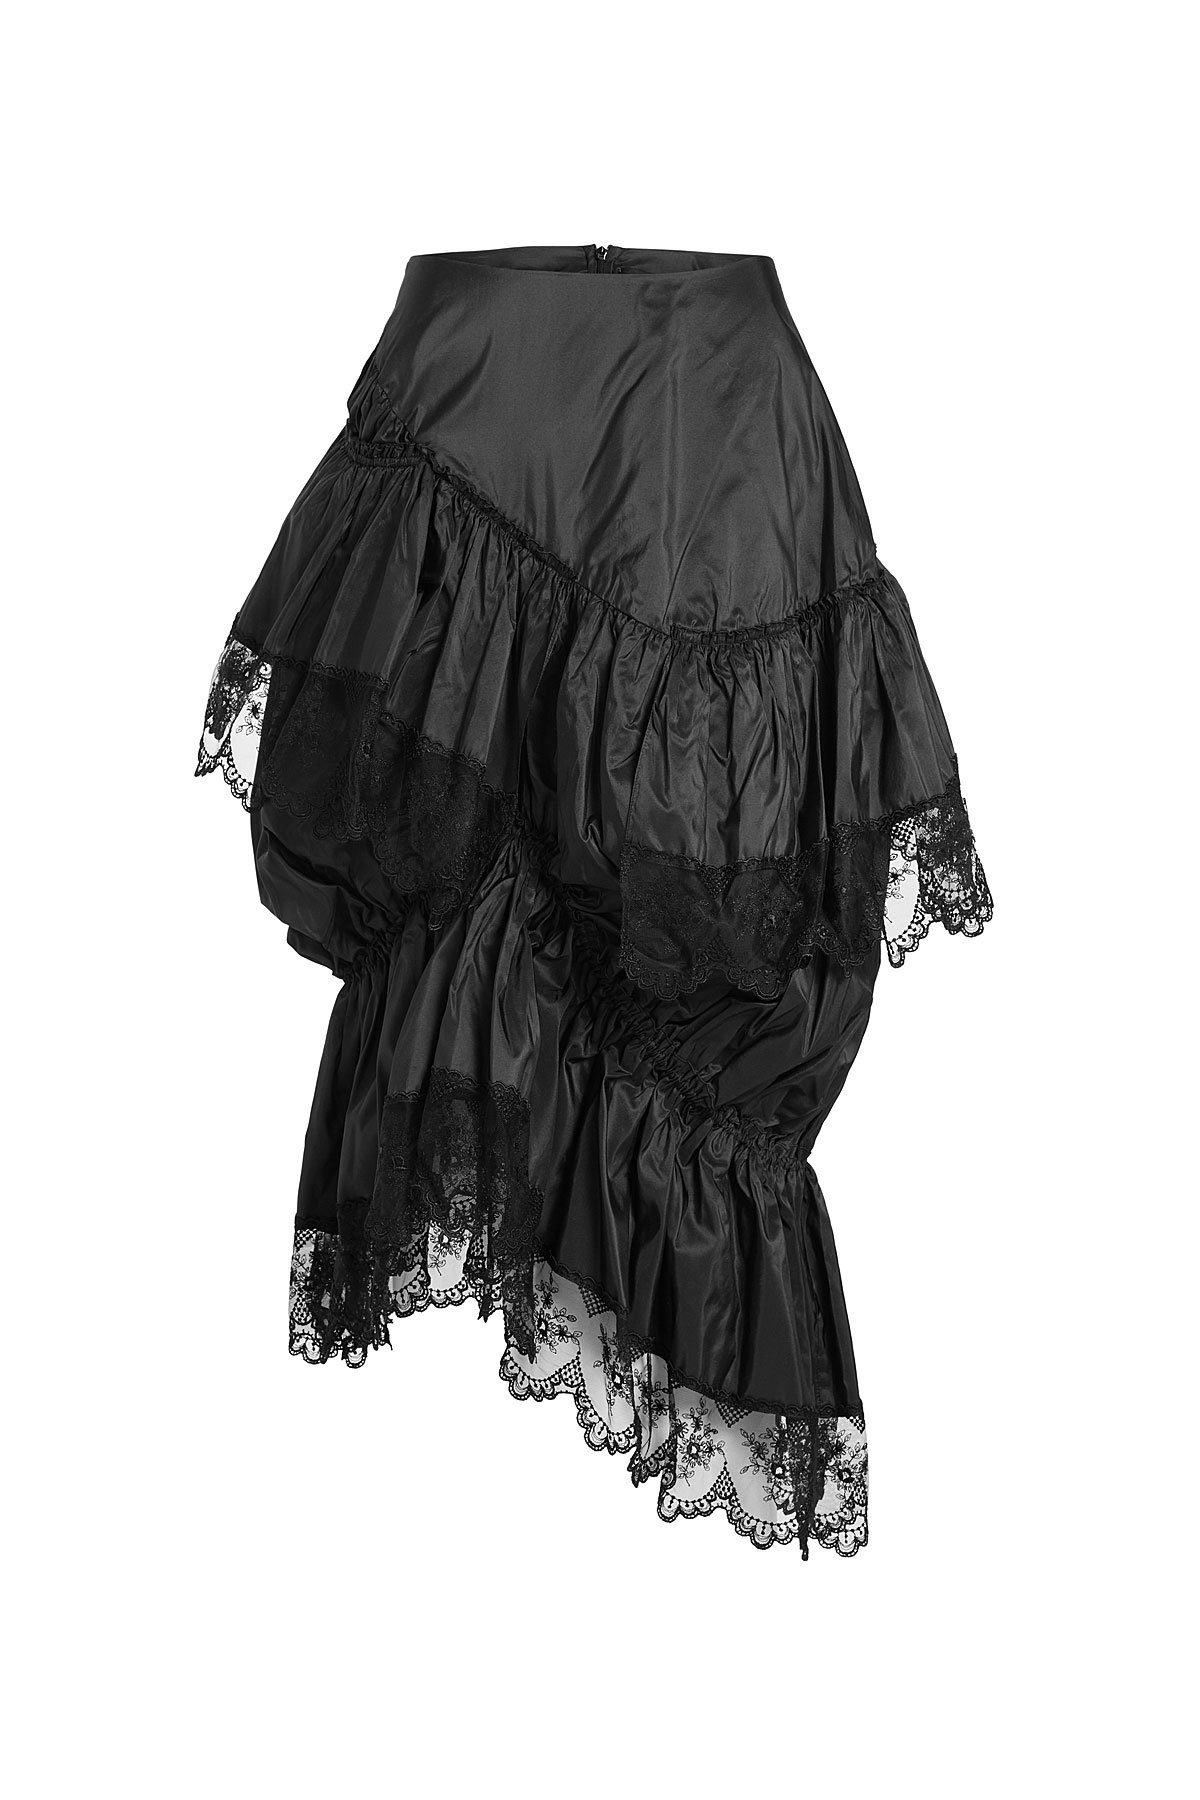 Silk Skirt with Lace by Simone Rocha